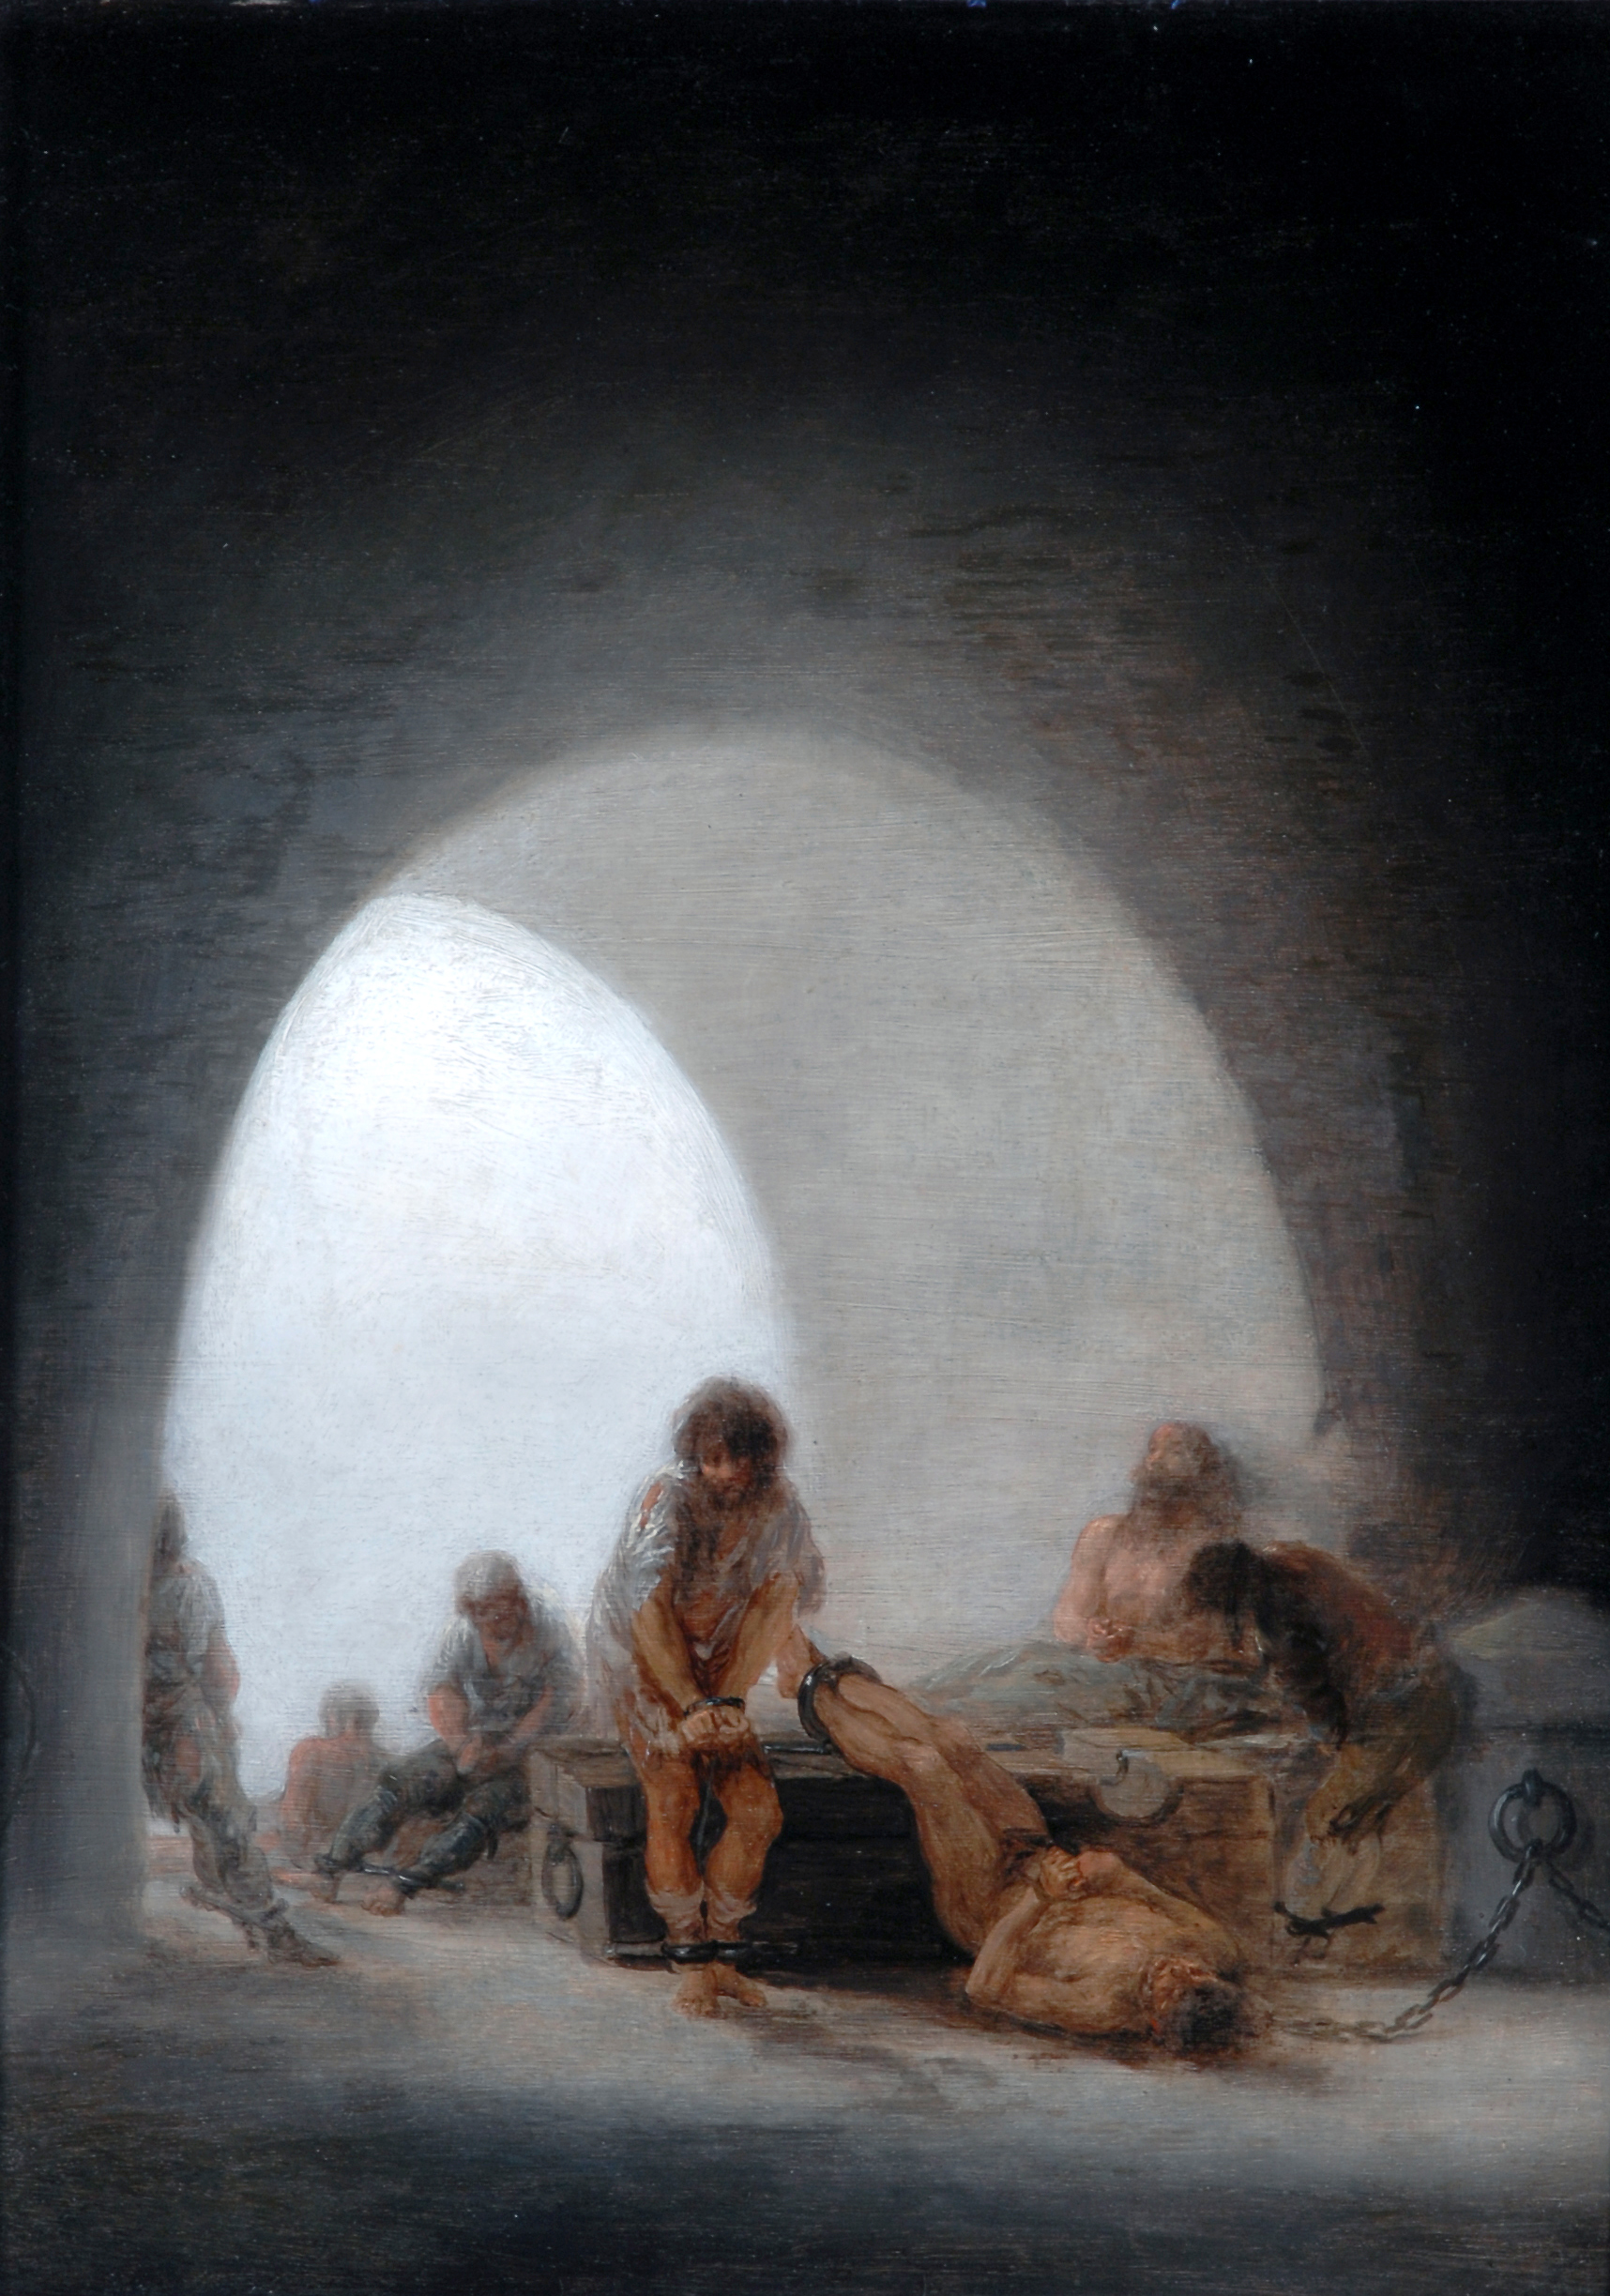 Interior of the Prison by Francisco Goya - 1793-1794 - 42.9 cm × 31.7 cm Bowes Museum